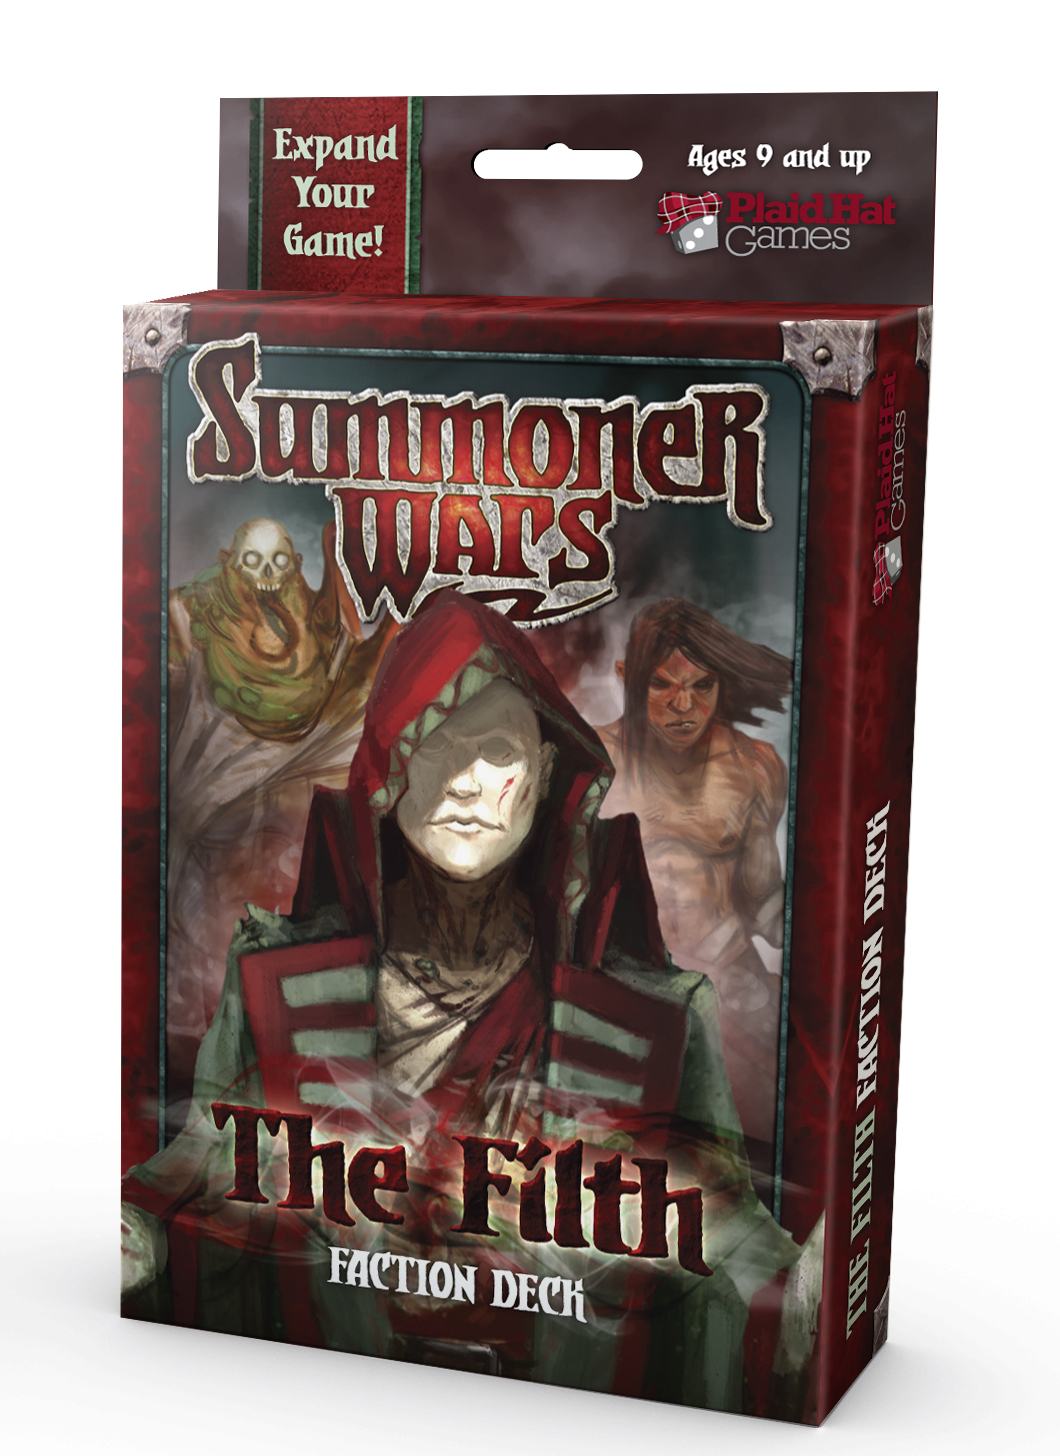 Summoner Wars: The Filth by Plaid Hat Games